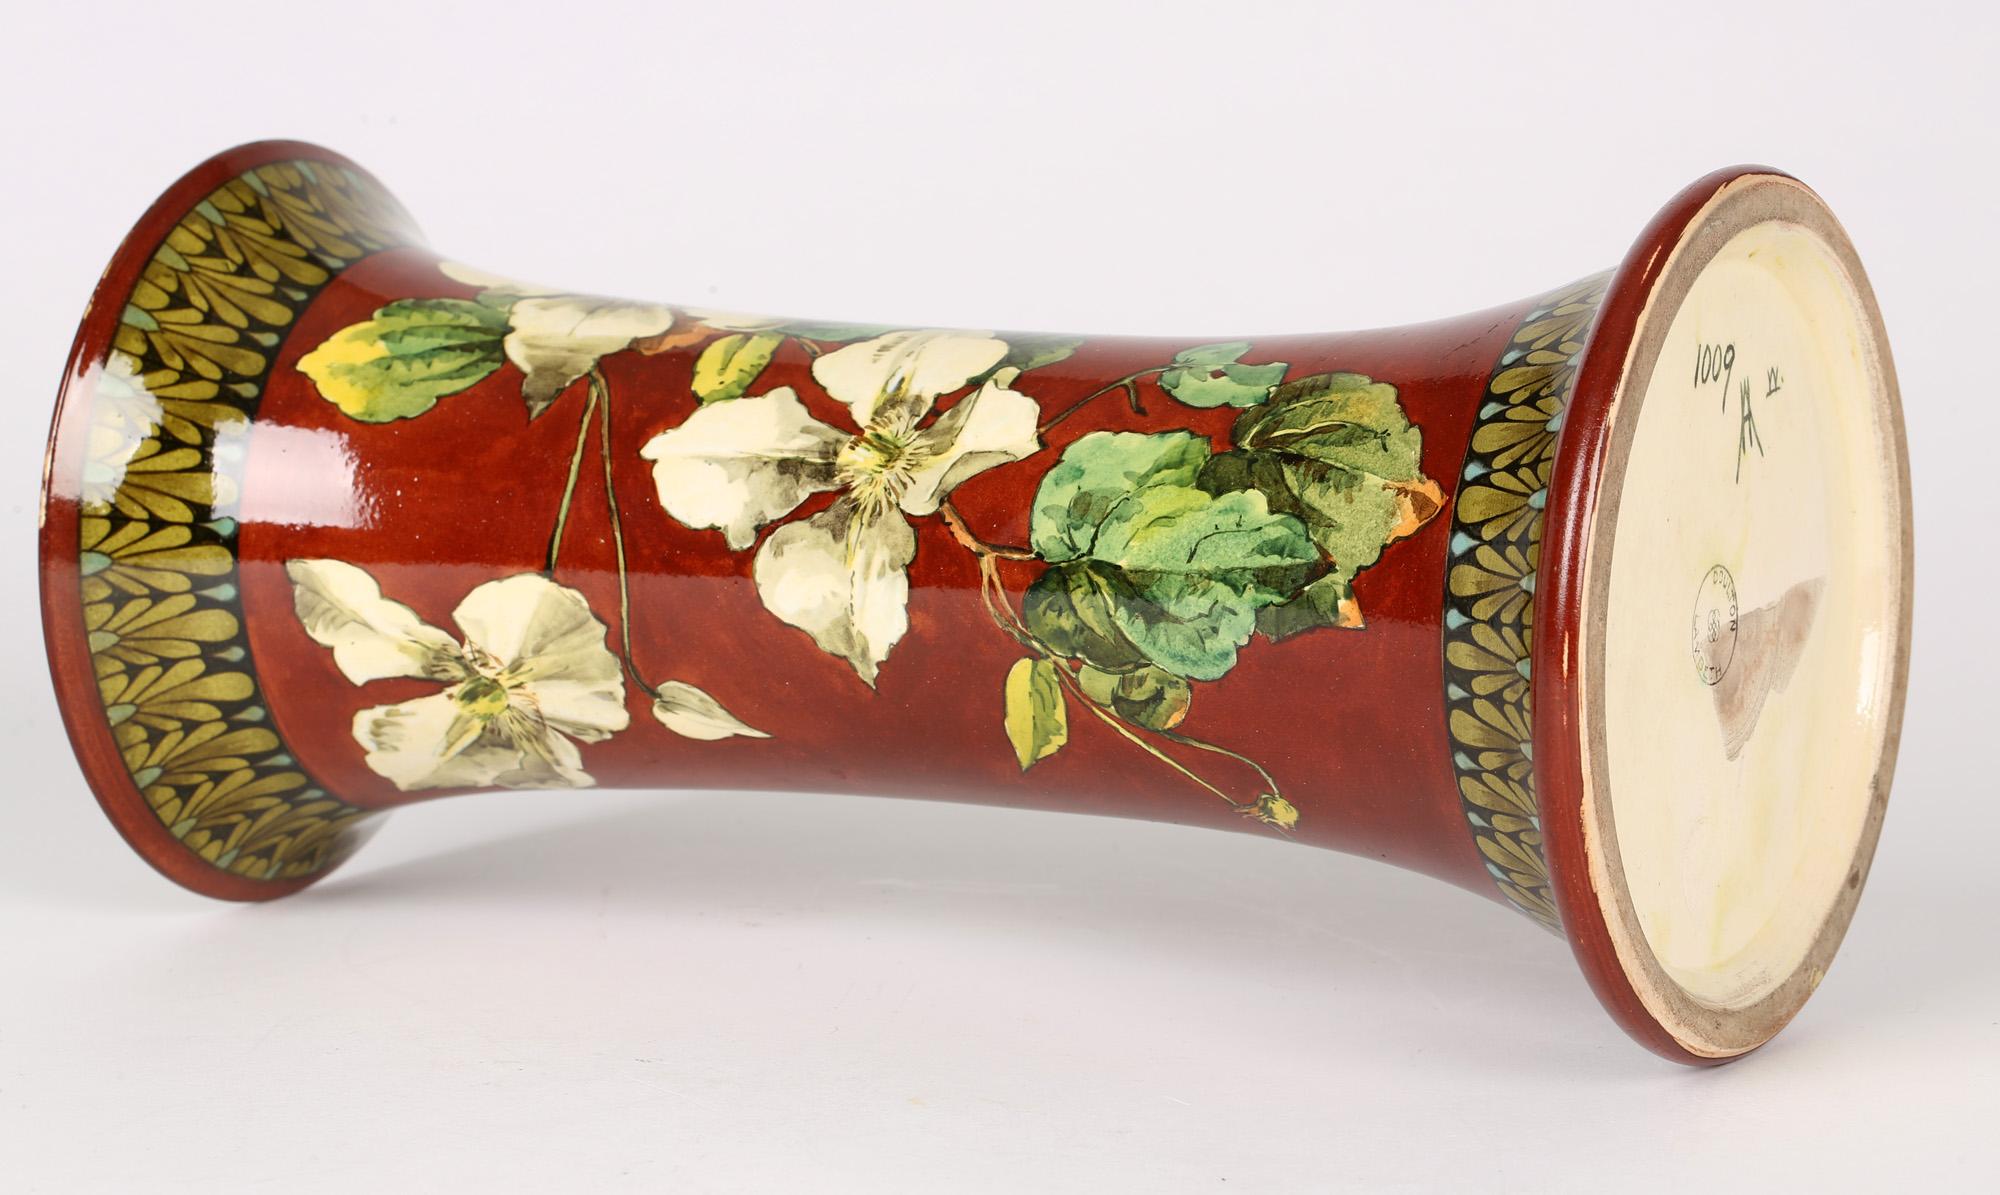 Late 19th Century Doulton Lambeth Faience Mary A Harding Hand Painted Floral Art Pottery Vase